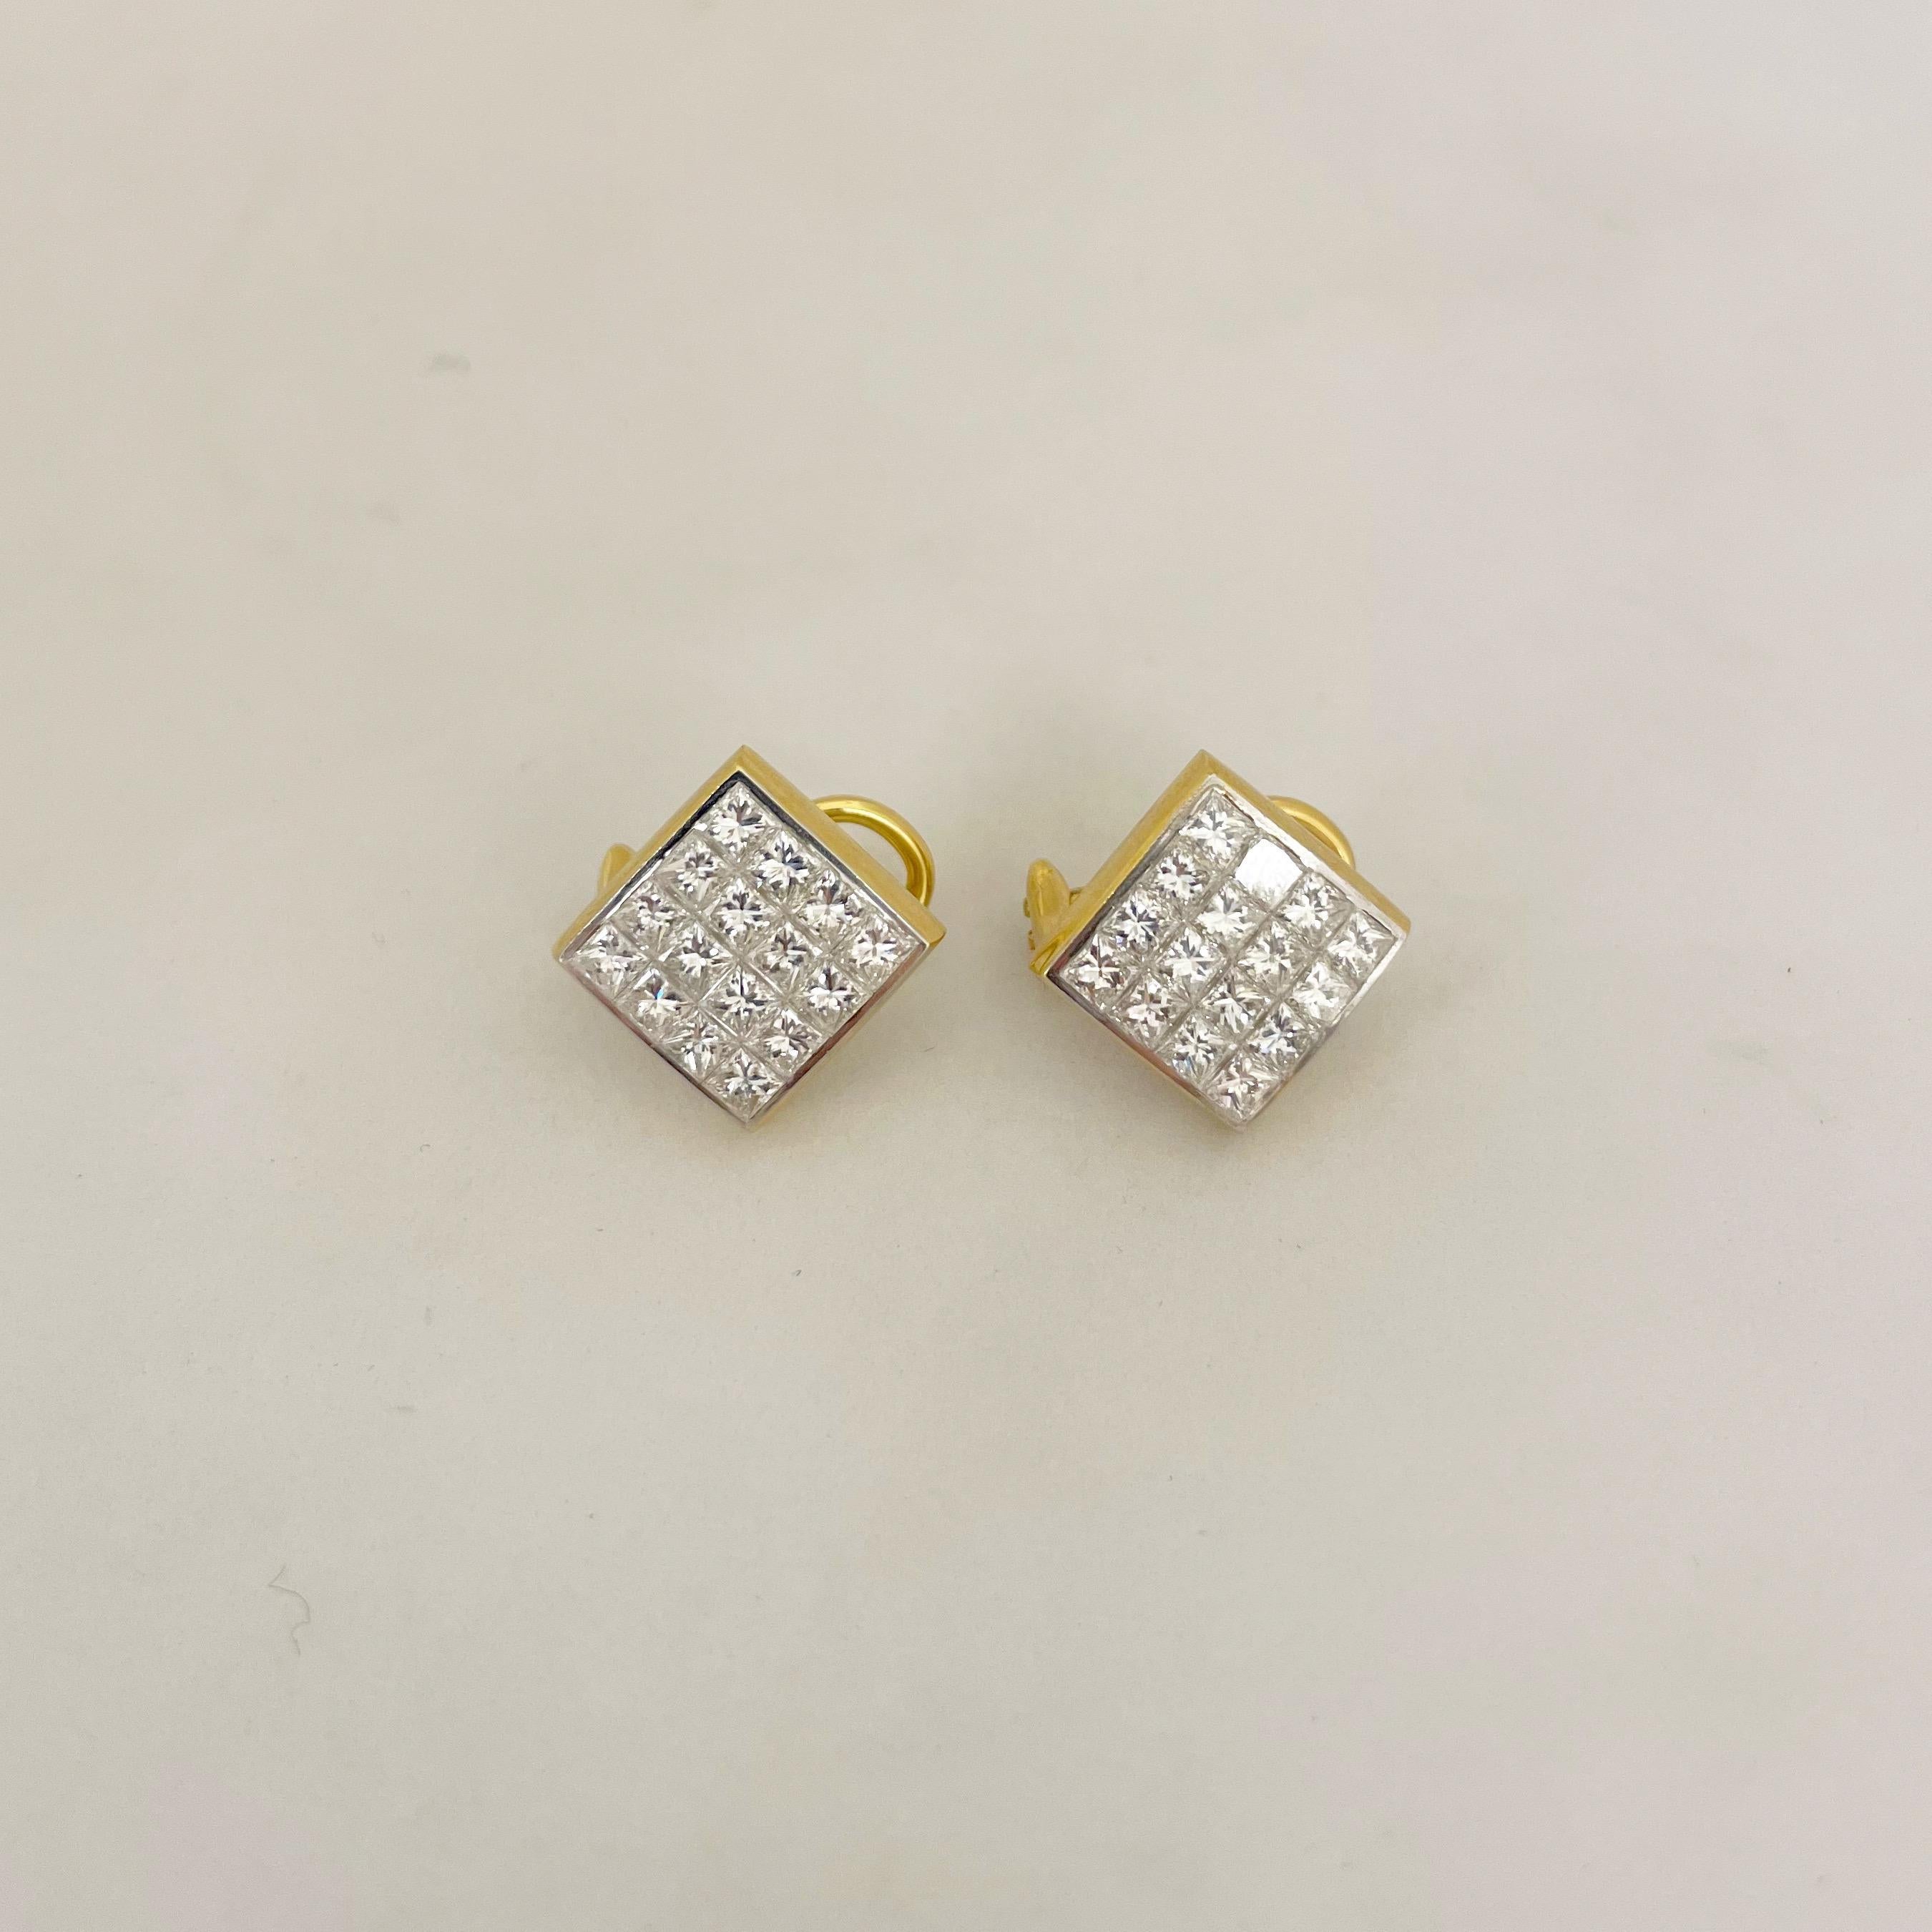 These ultra brilliant square diamond stud earrings are comprised of 2.95 carats of princess cut diamonds, invisibly set in 18Kt white gold as to not take away from the natural fire of the stones. 
French Clip back, Can be adjusted for non pierced